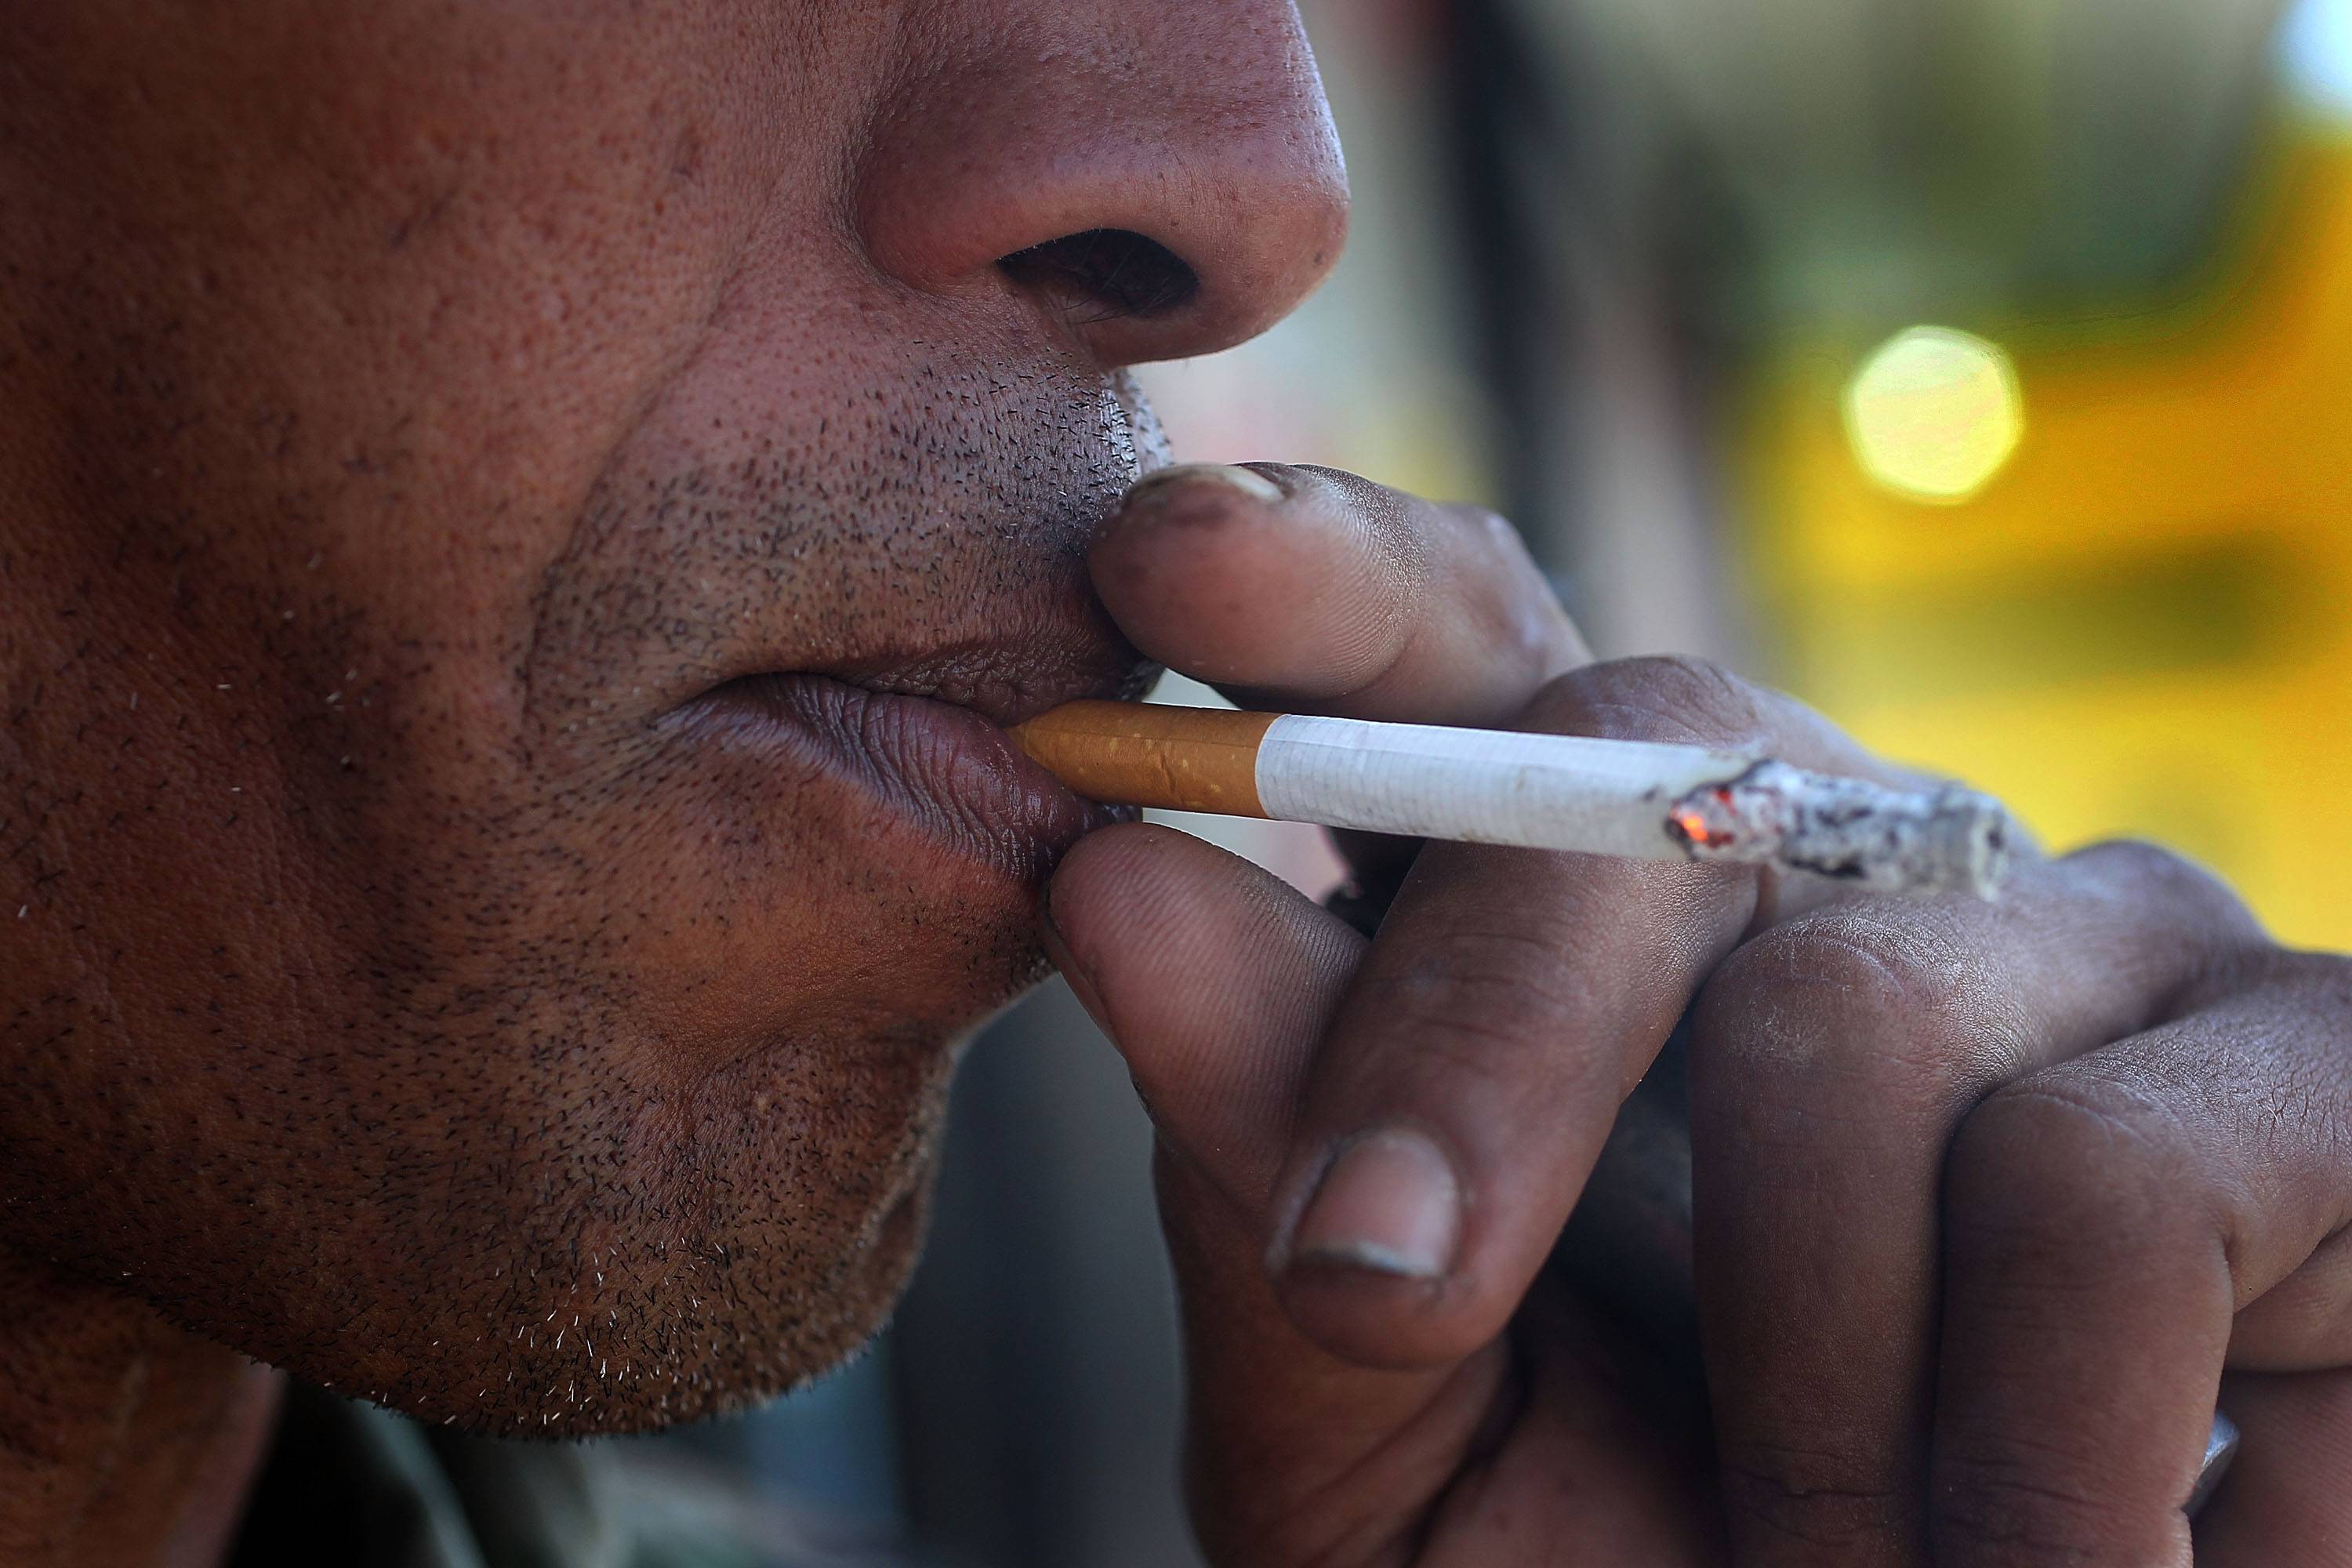 Are Menthol Cigarettes Losing Their Cool? - Menthol cigarettes, popular in the Black community, may be losing their appeal according to a new study. The report, released in the American Journal of Public Health, shows that 83 percent of Blacks and the majority of Americans want to ban the addictive cigarettes.(Photo: Joe Raedle/Getty Images)